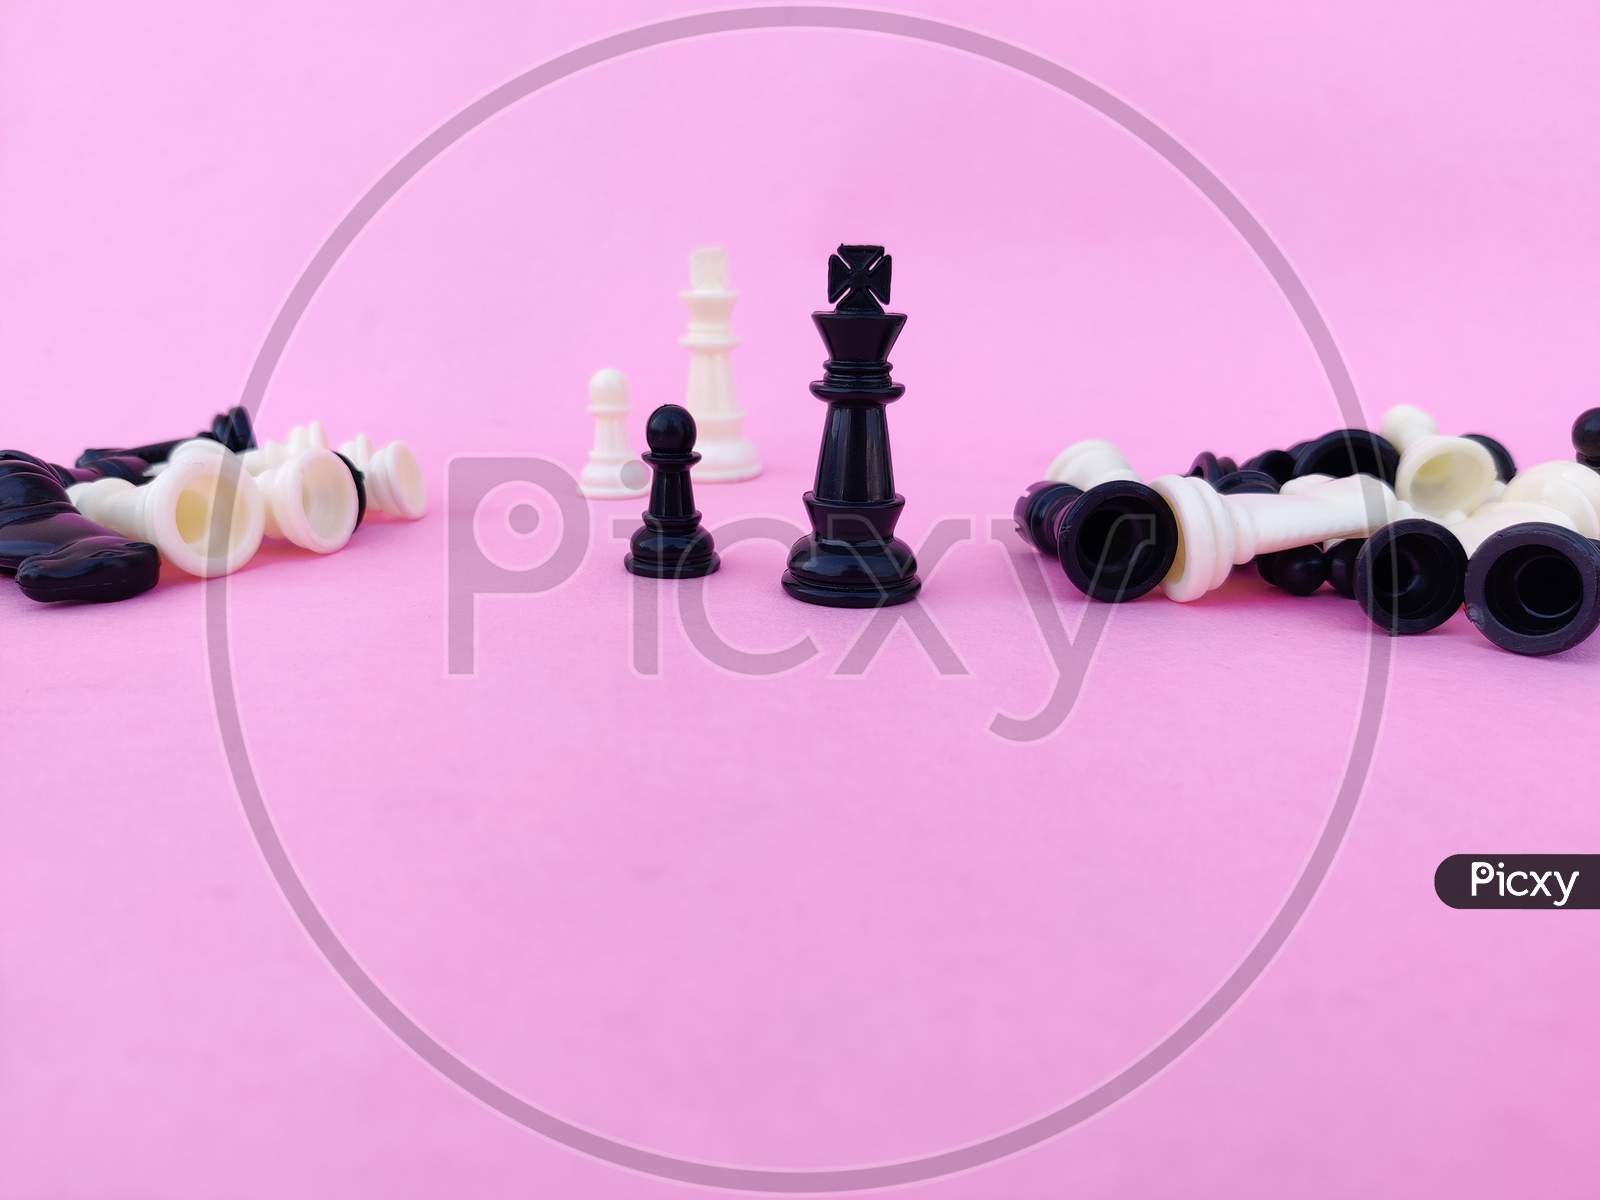 Black Chess King,Pawn And White Chess King,Pawn Surrounded By Number Of Fallen Chess Pieces.Isolated On Pink Background.